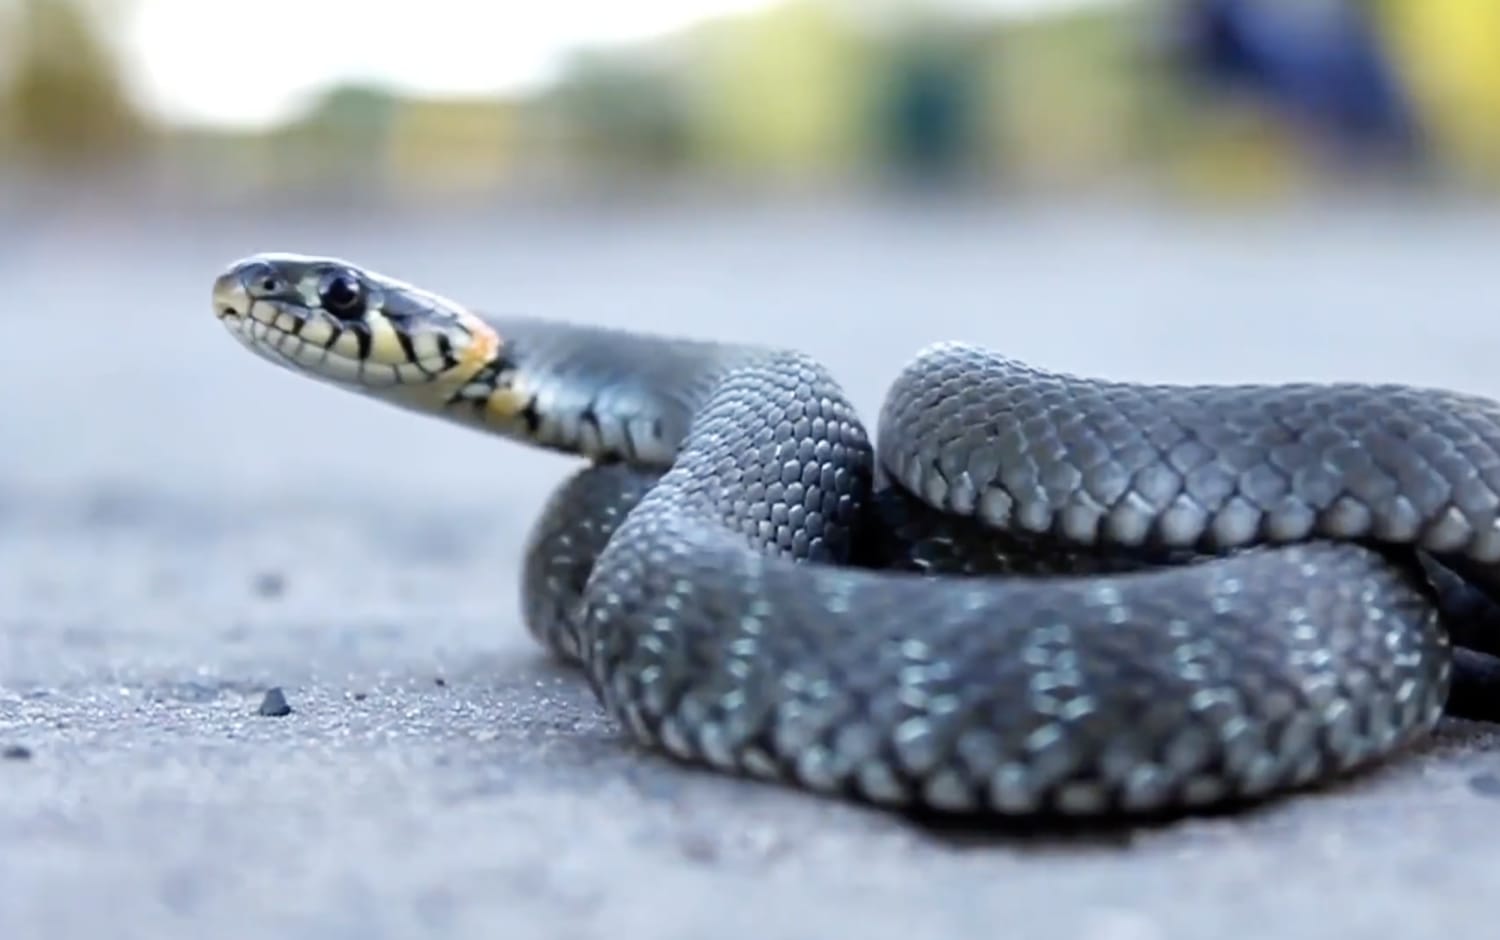 Illinois road closed for snake migration shows need for wildlife crossings